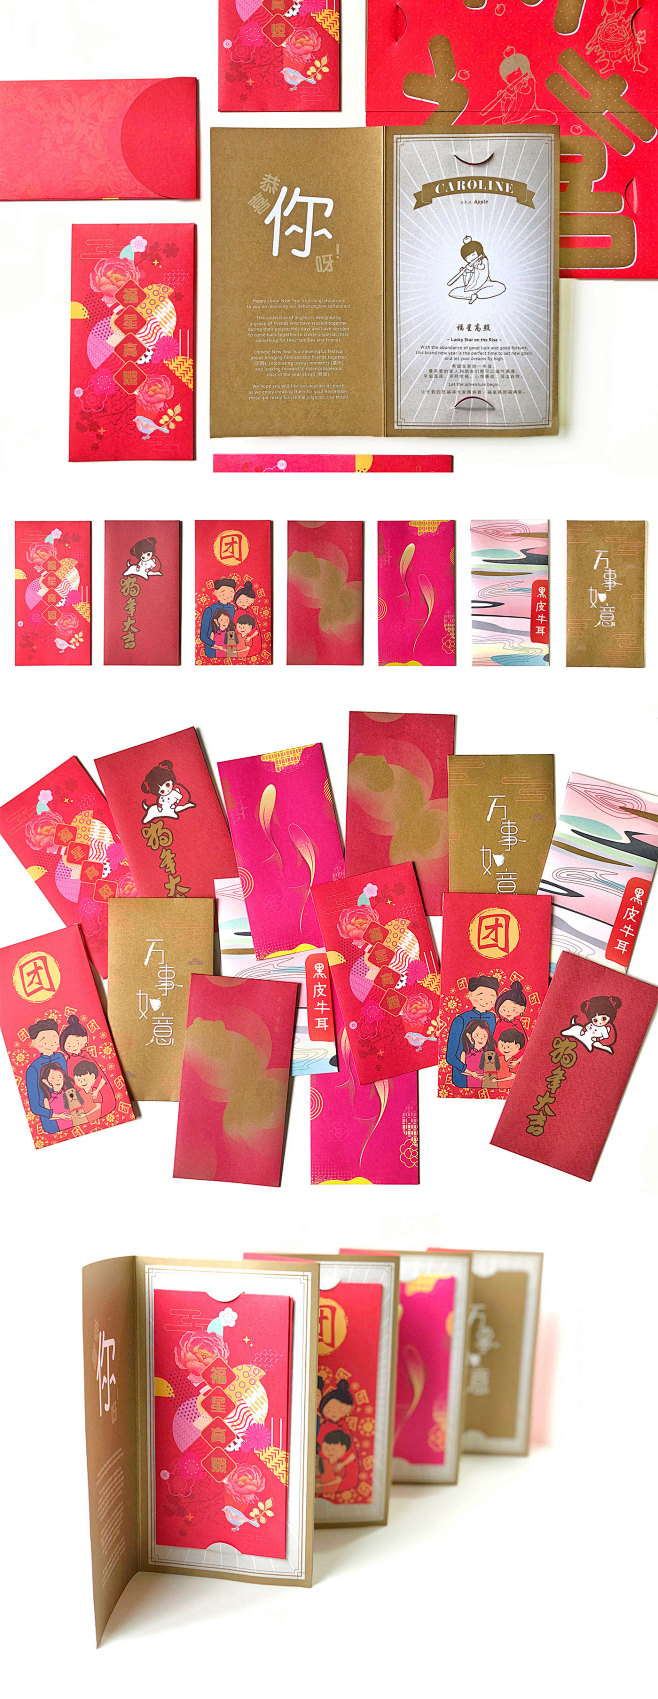 Red Envelope project...